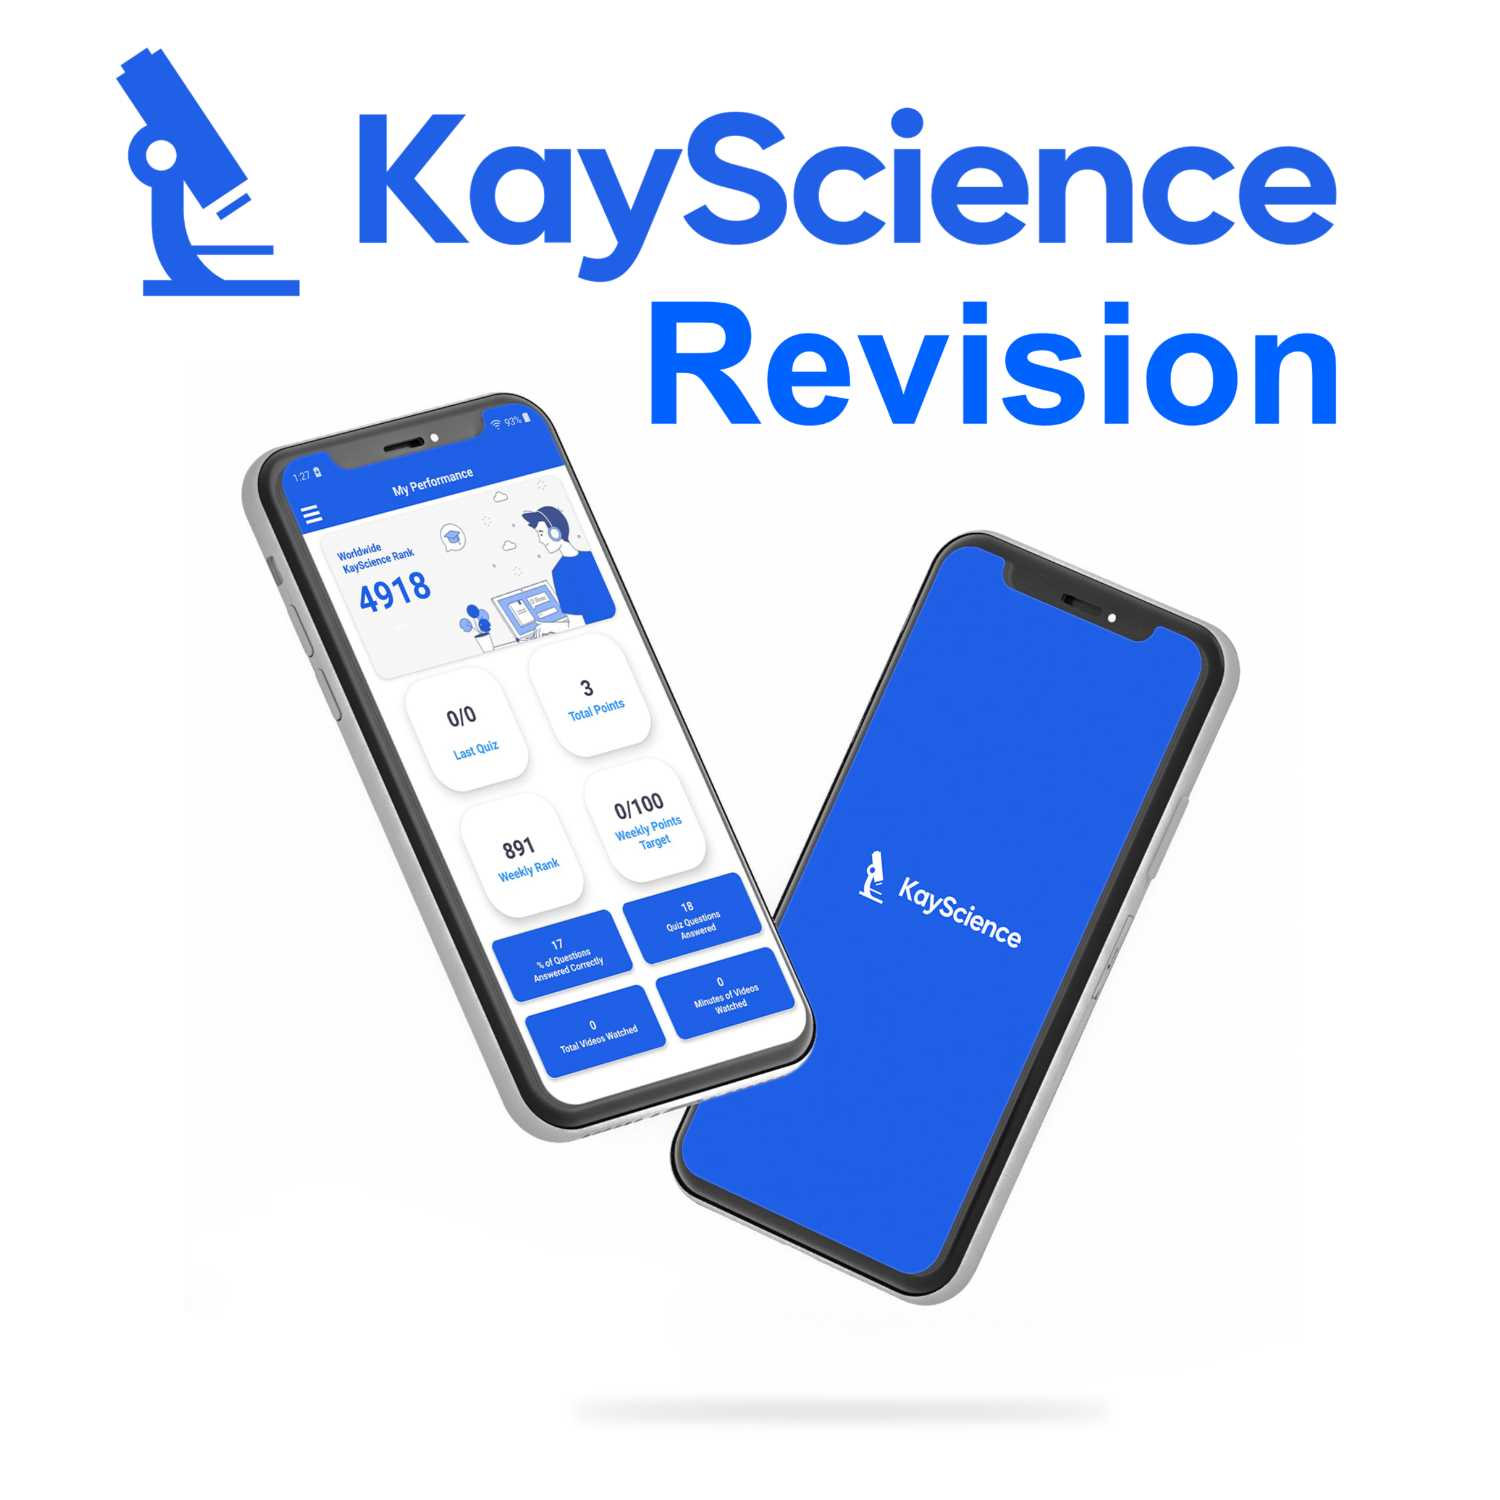 GCSE Physics Audio: Energy Resources by KayScience.com